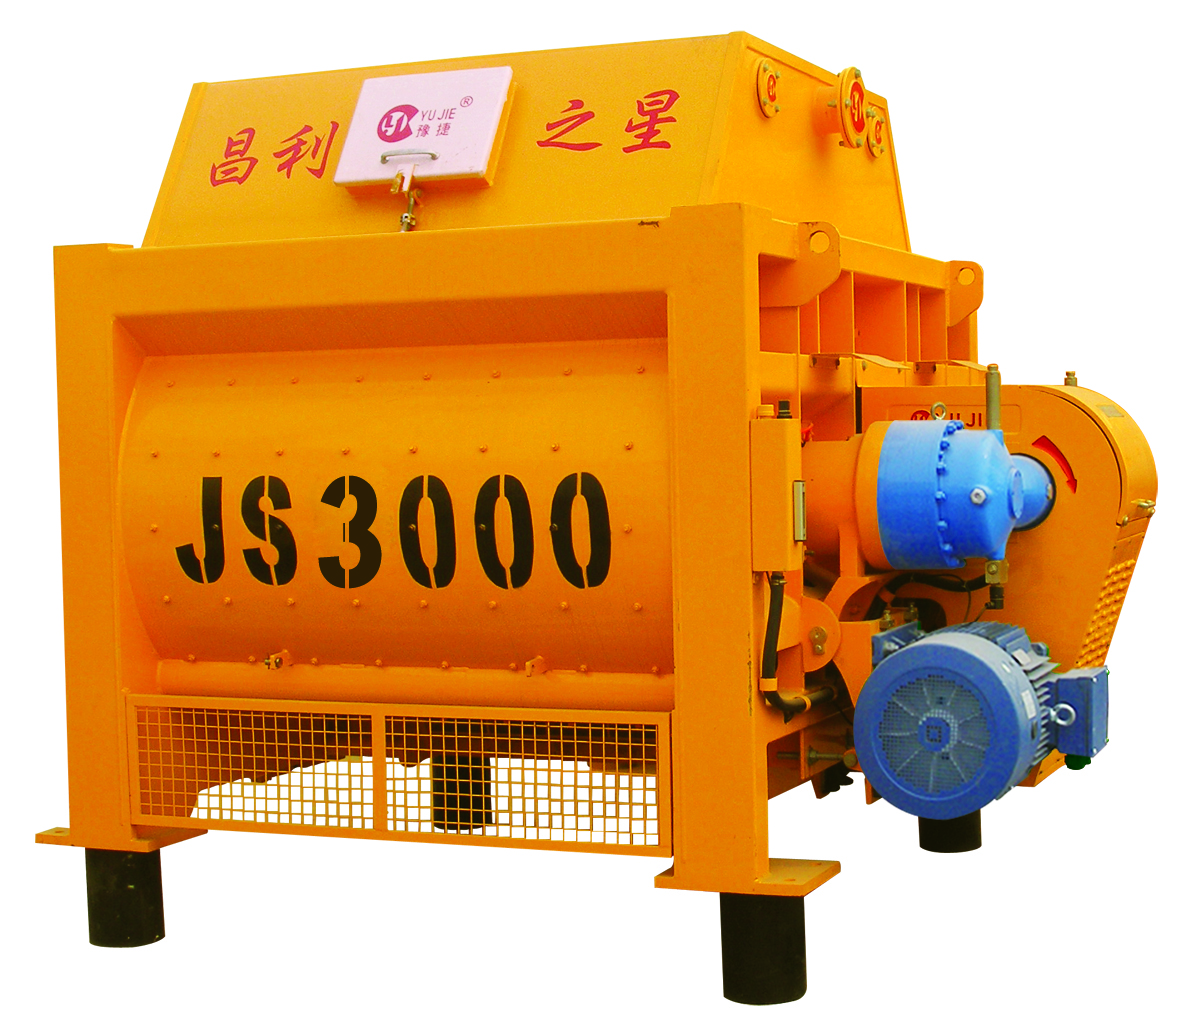 Top Concrete Mixer Manufacturer with Patented Technology